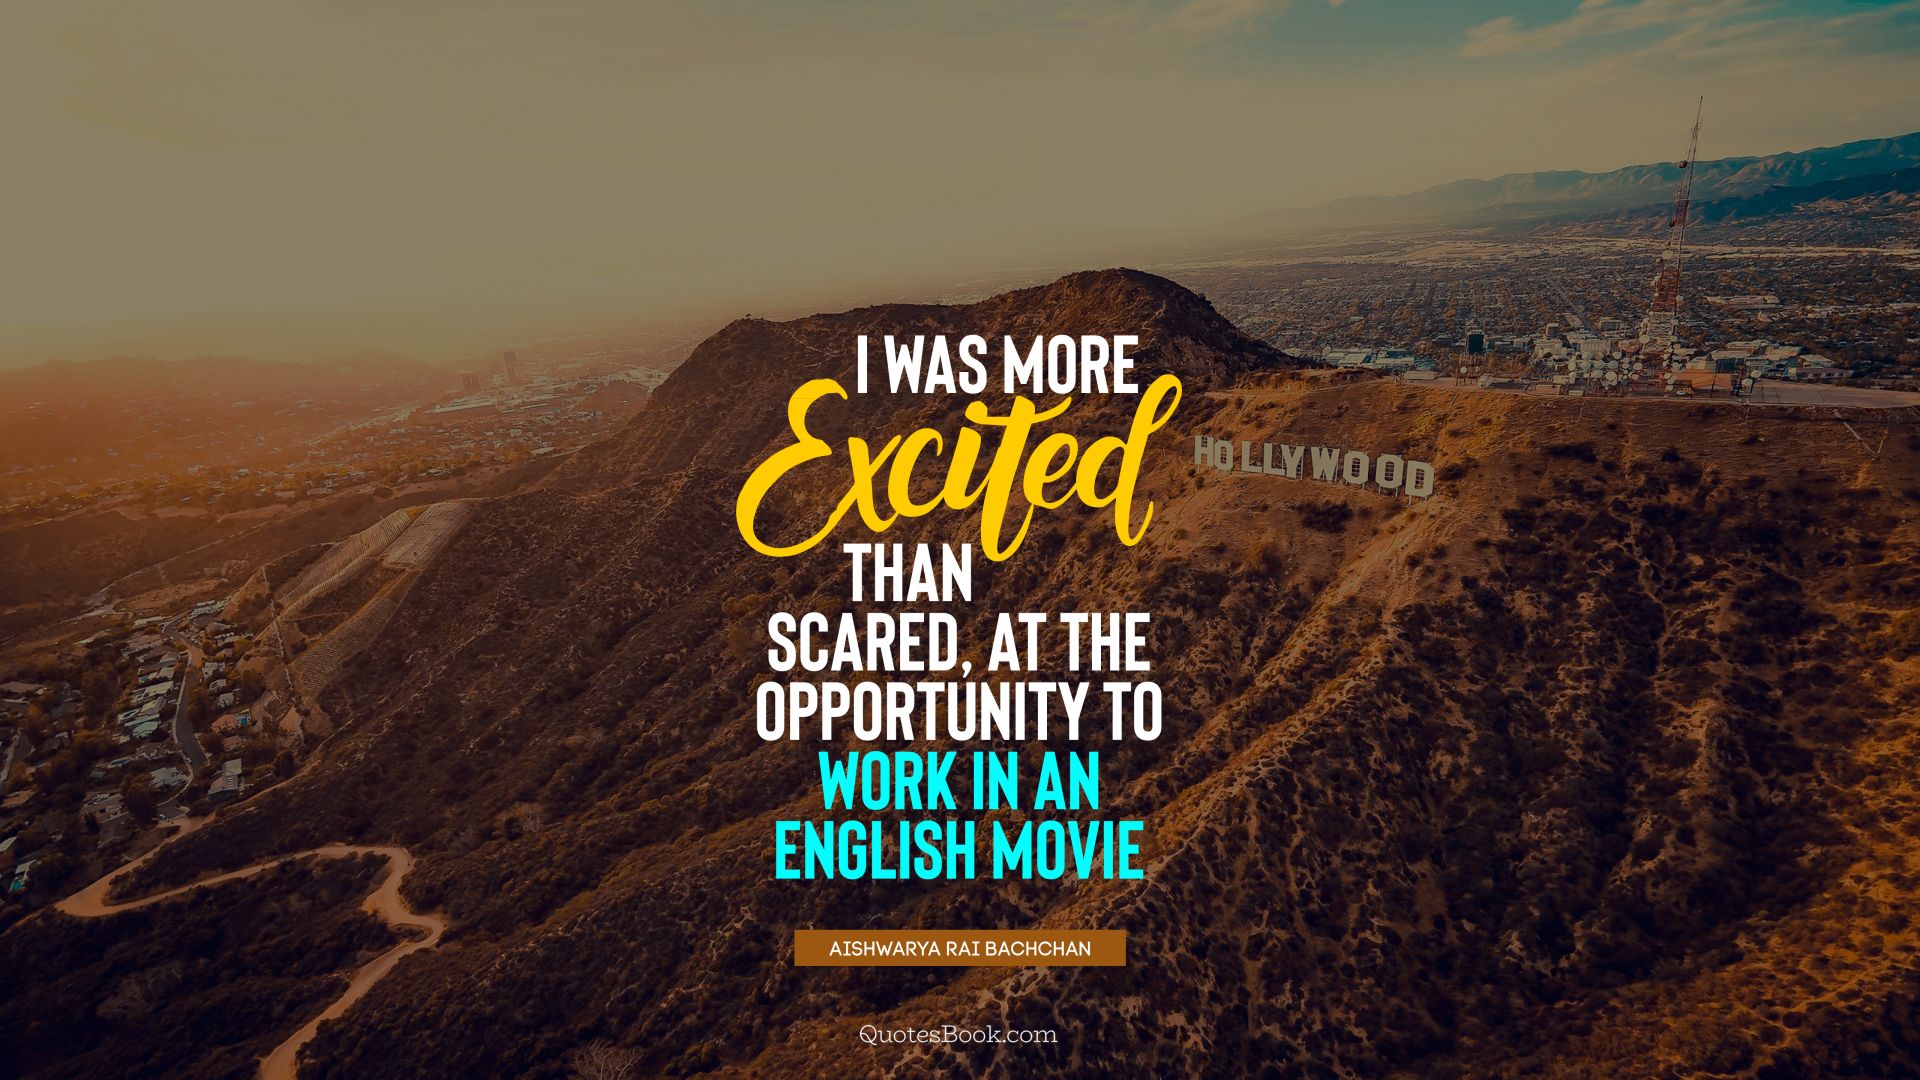 I was more excited than scared, at the opportunity to work in an English movie. - Quote by Aishwarya Rai Bachchan